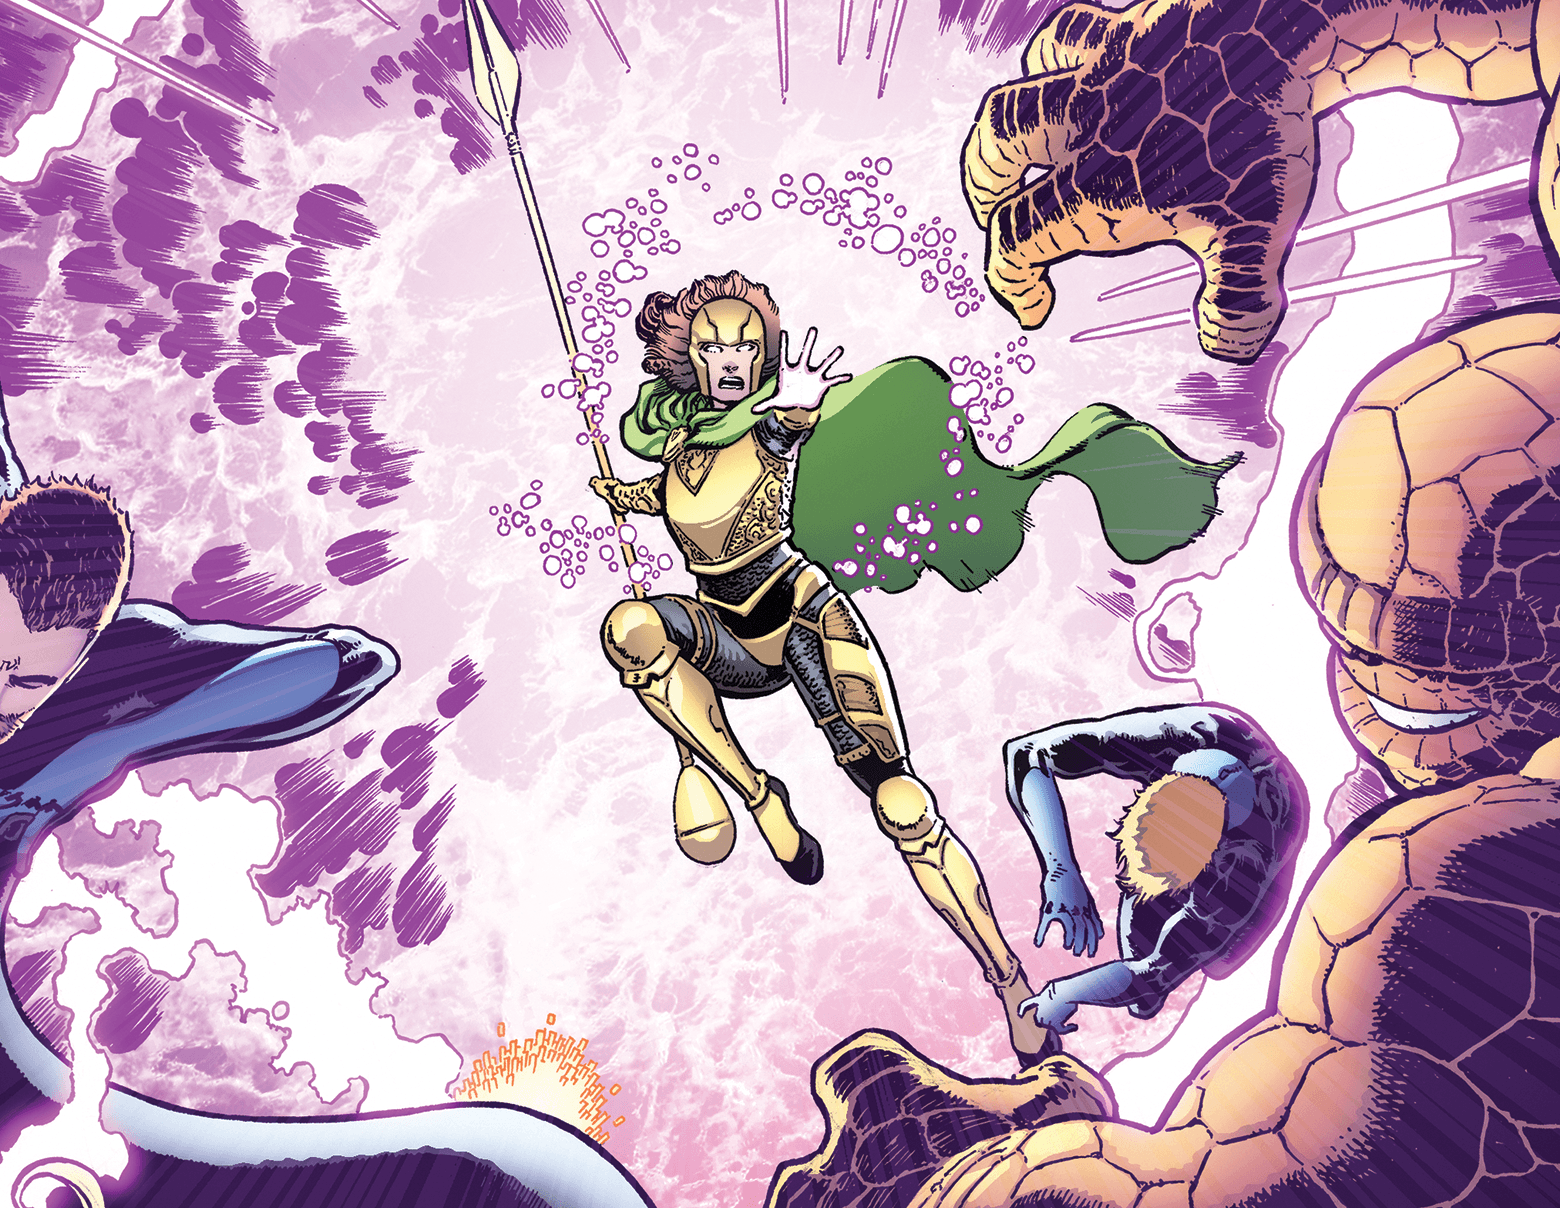 FANTASTIC FOUR #6 Interior art by Aaron Kuder with colors by Marte Gracia & Erick Arciniega